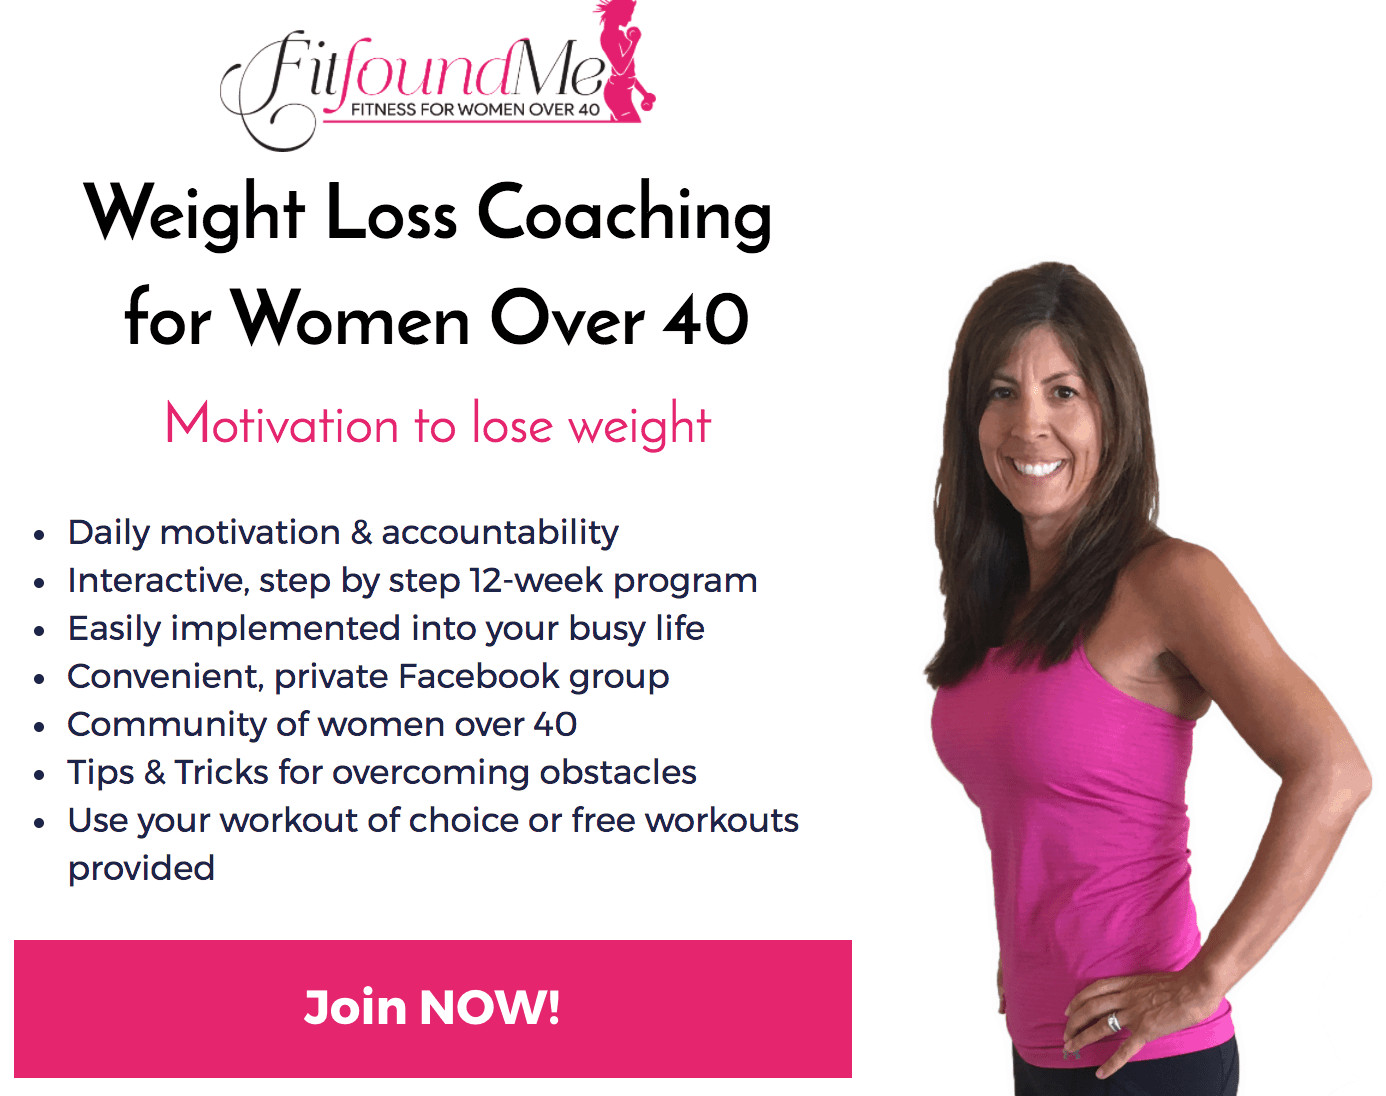 How To Lose Weight Over 40
 40 Minute Cardio Workout for Women Over 40 to Lose Weight